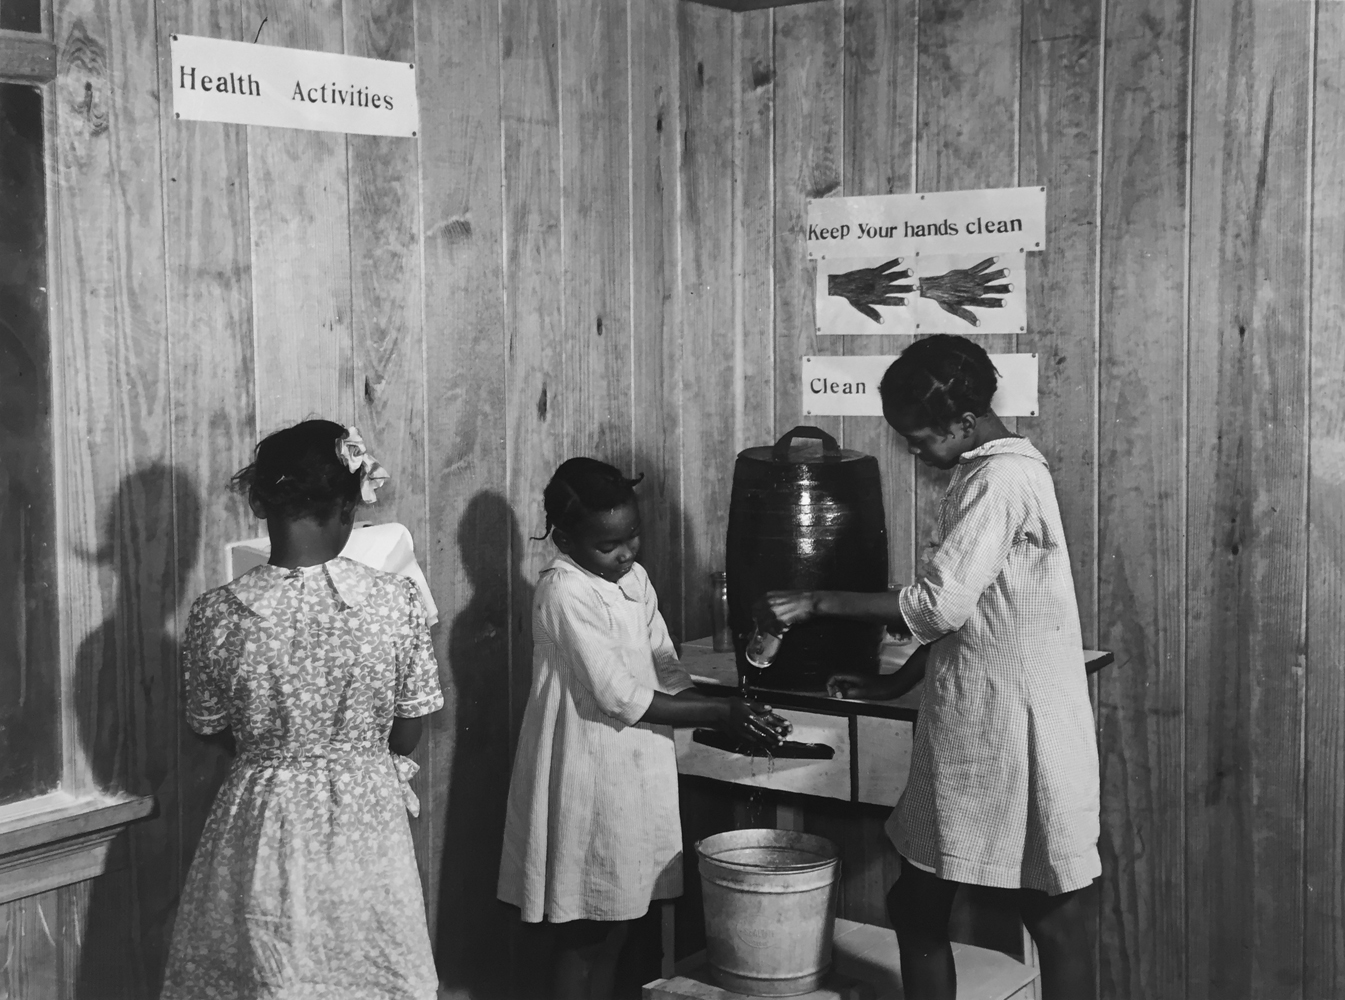 Marion Post Wolcott, Gladys Crimer drying her hands on a paper towel and Berenice Mathis and Edna Law washing theirs in the cleanup corner in the second- and thirtd-grade schoolroom, near Montezuma, Georgia, 1939, gelatin silver print, 11 x 14 inches, signed by artist, $3000.